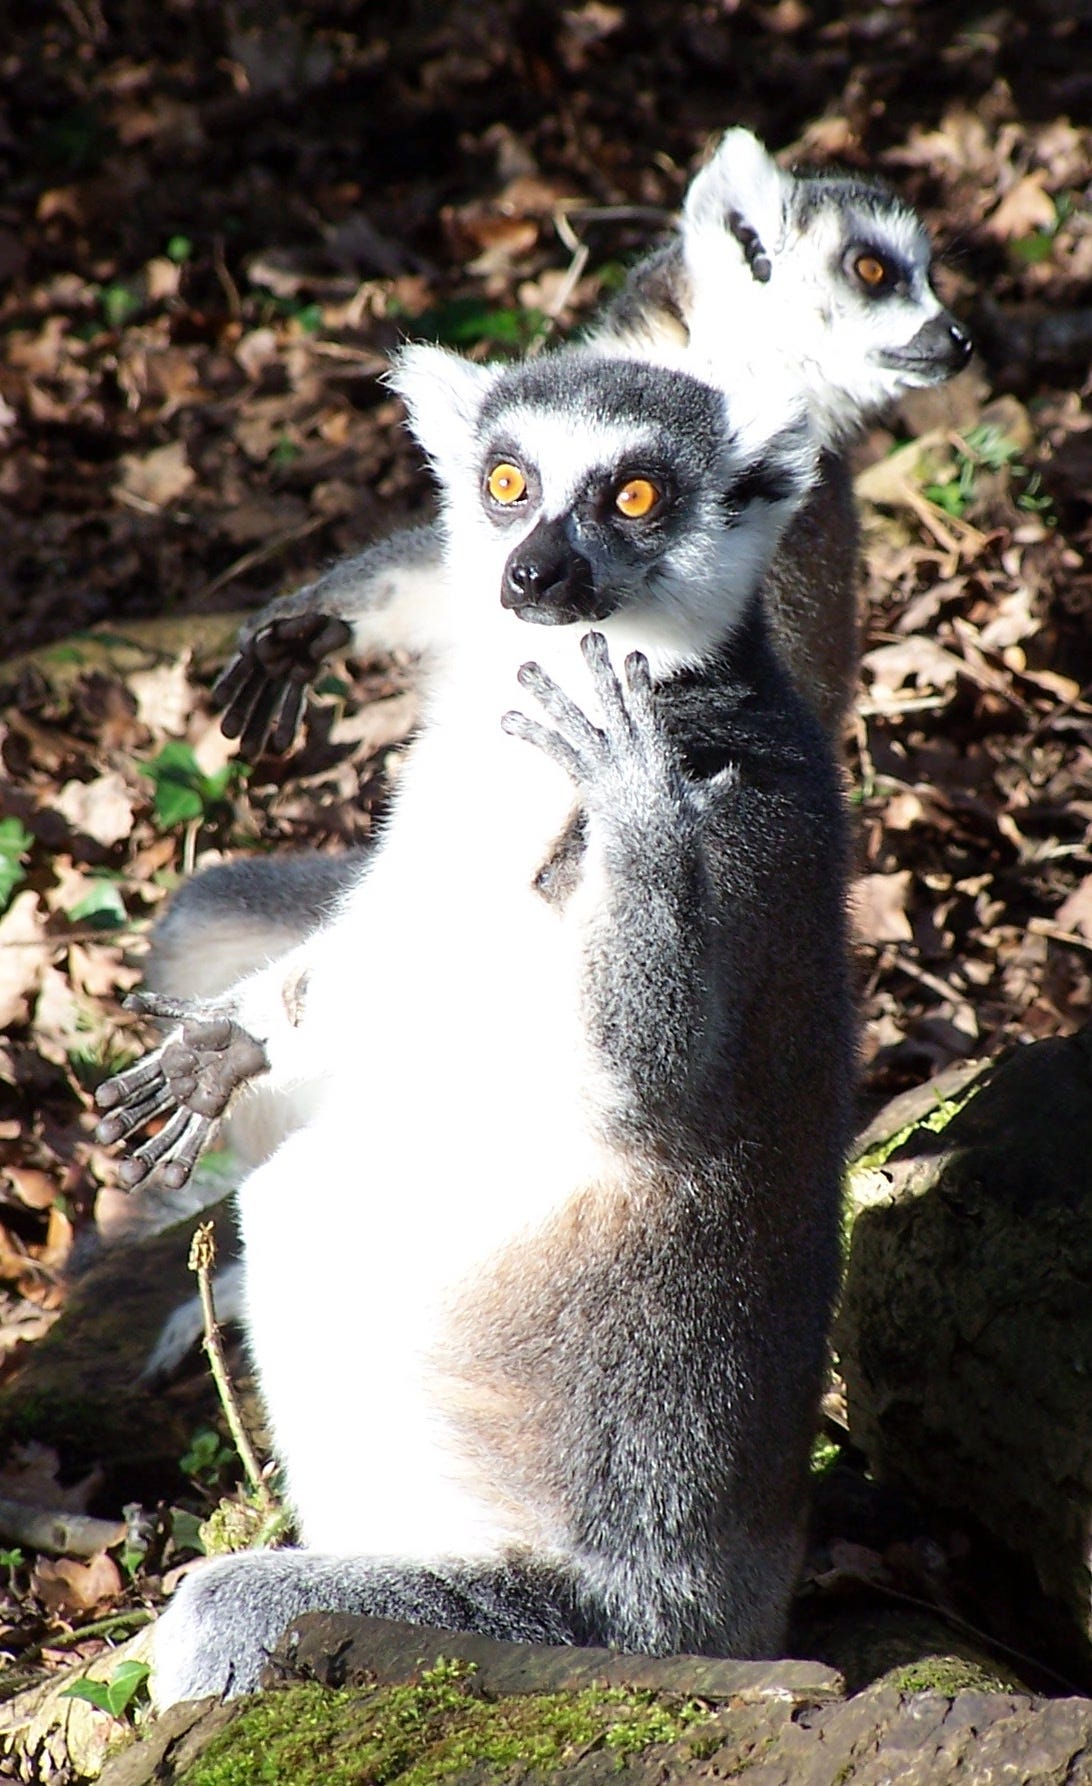 Two lemurs standing on hind legs, one partially obscured by the other. Lemur in front has hands expressively open, fingers wide.